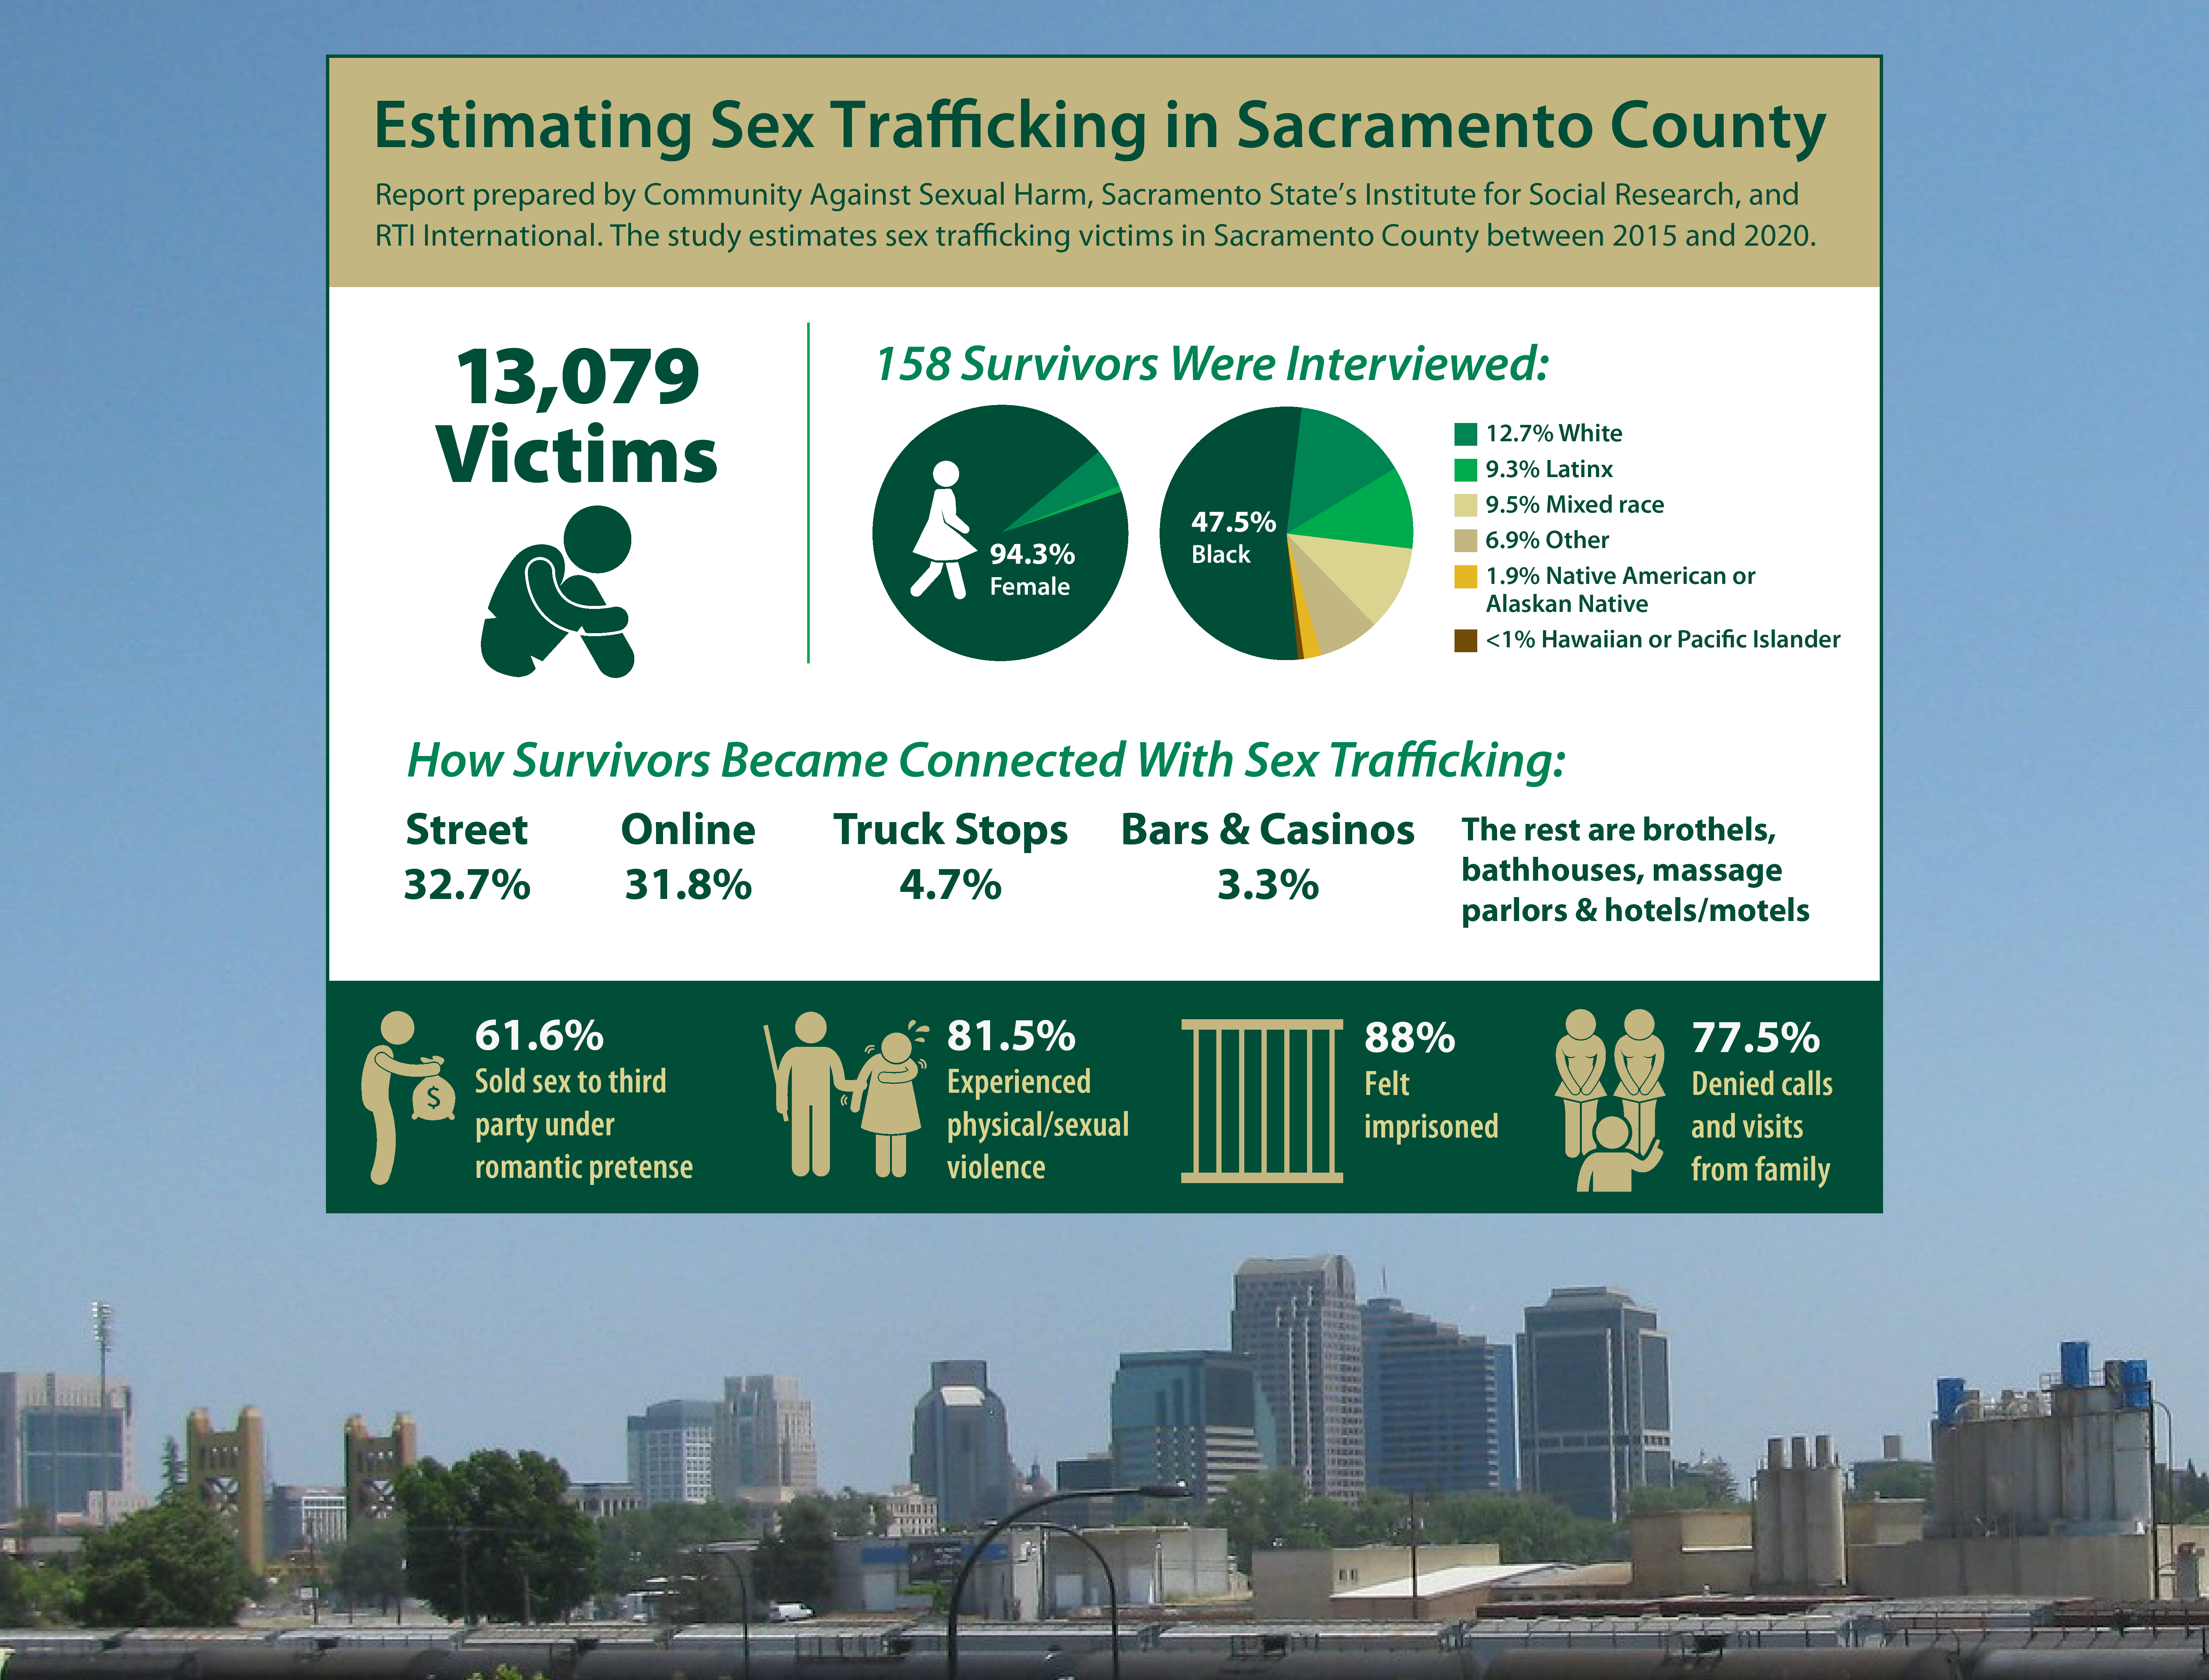 Sac States Institute For Social Research Helps Document Alarming Level